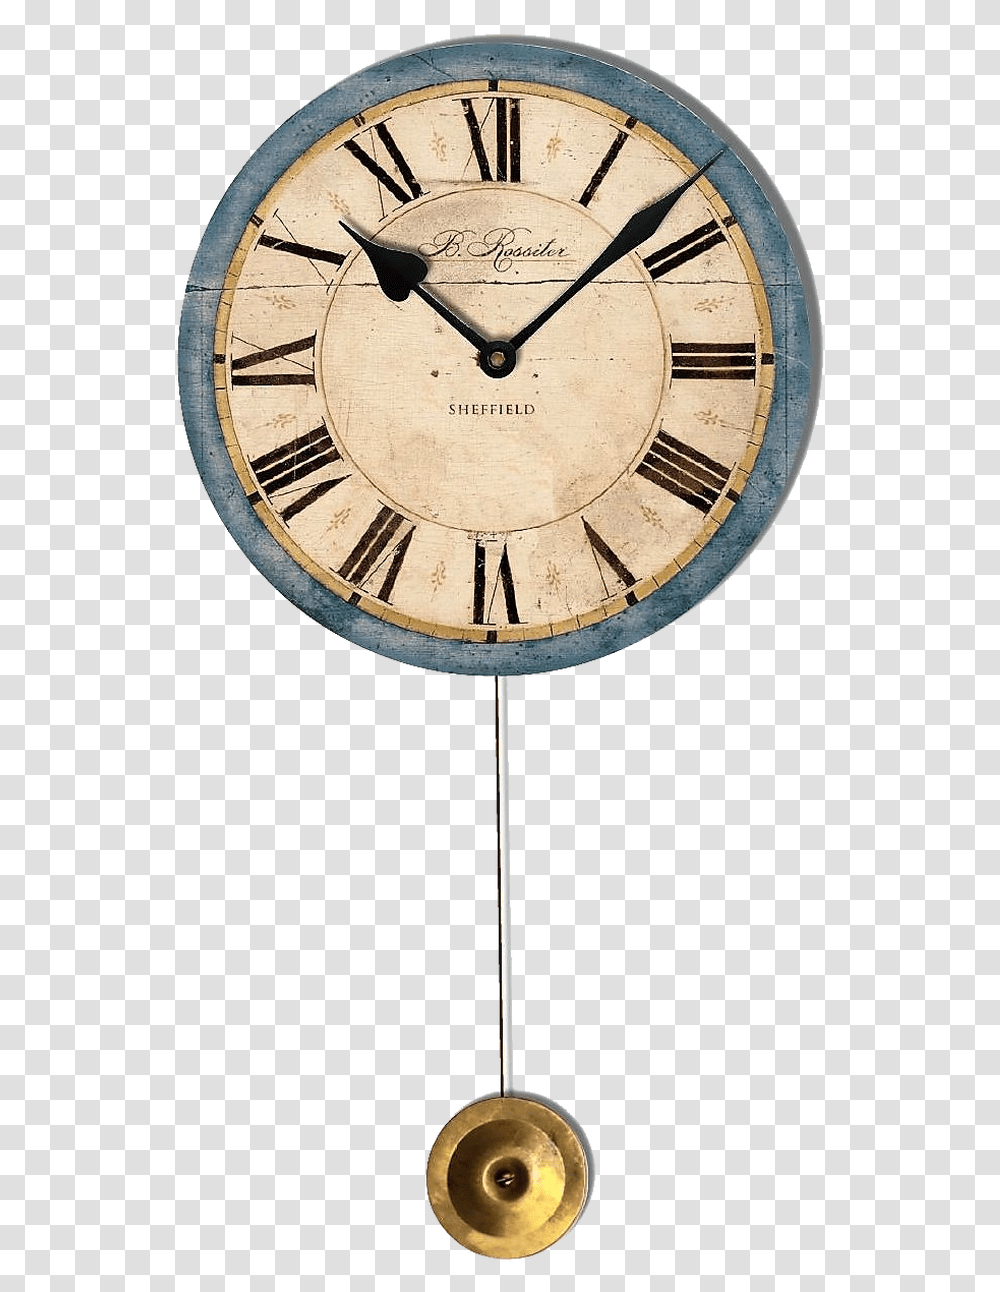 Old Wall Clocks With Pendulum, Clock Tower, Architecture, Building, Analog Clock Transparent Png